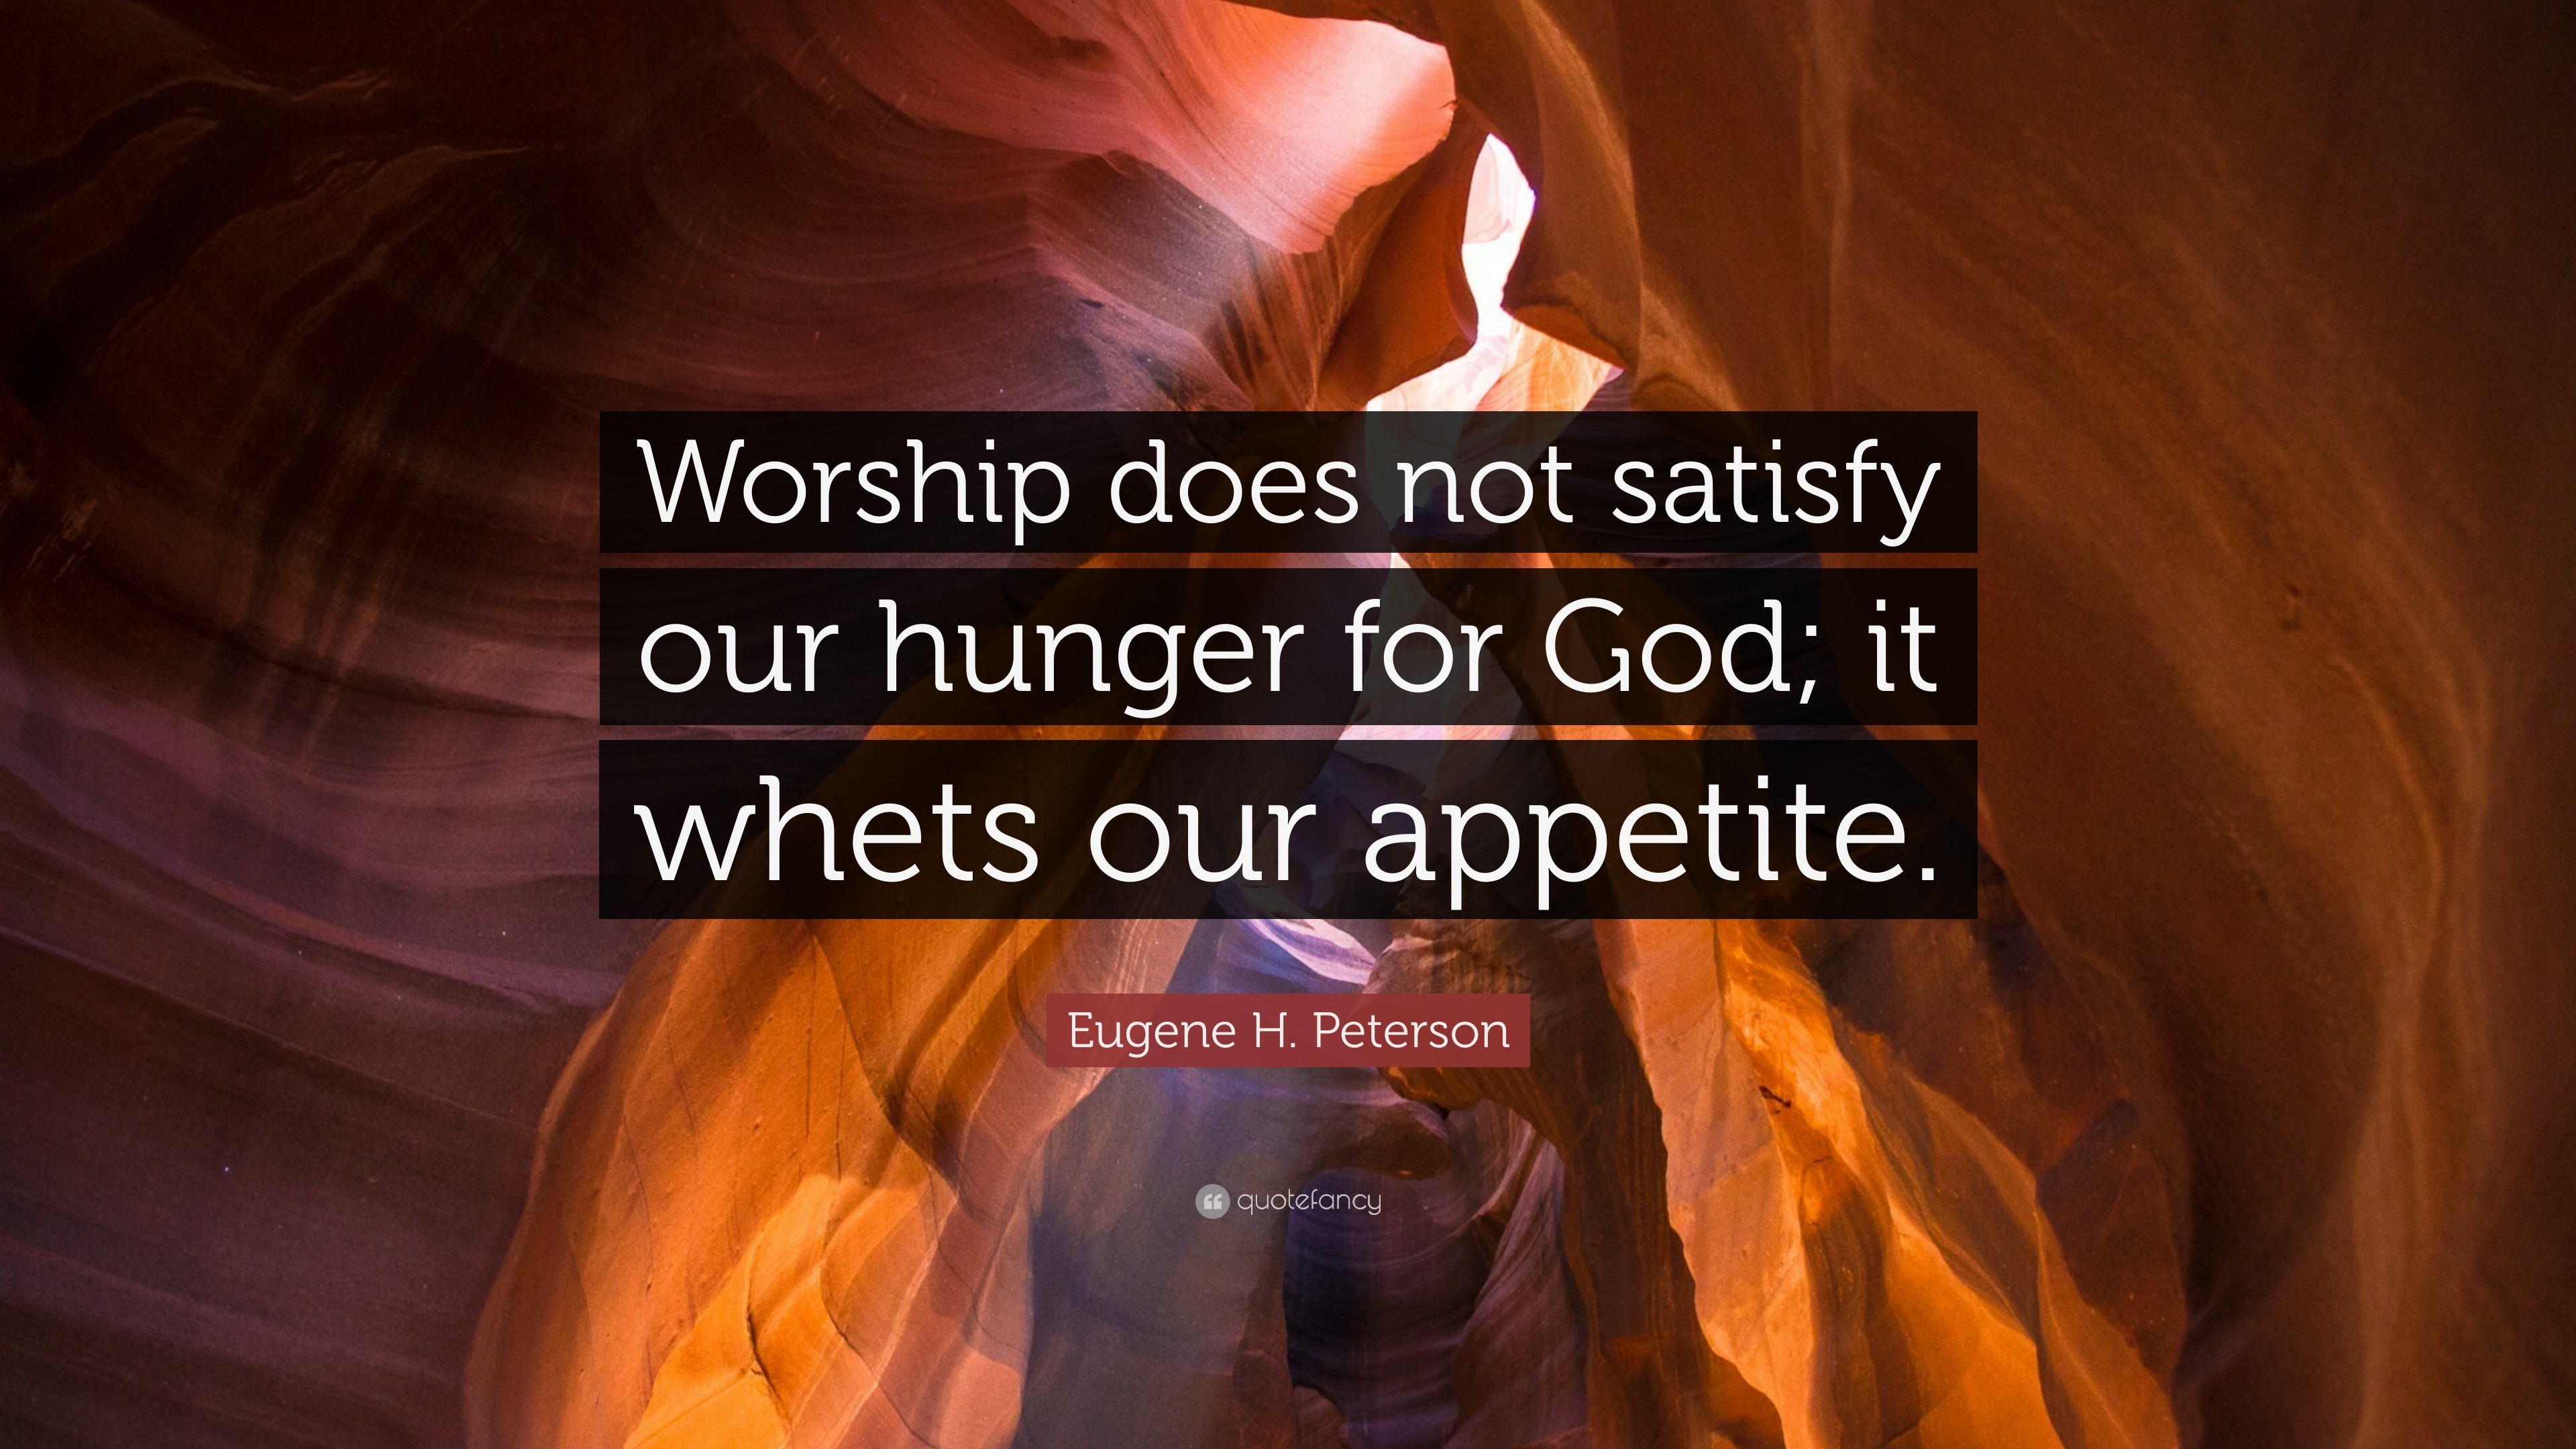 398363-Eugene-H-Peterson-Quote-Worship-does-not-satisfy-our-hunger-for.jpg